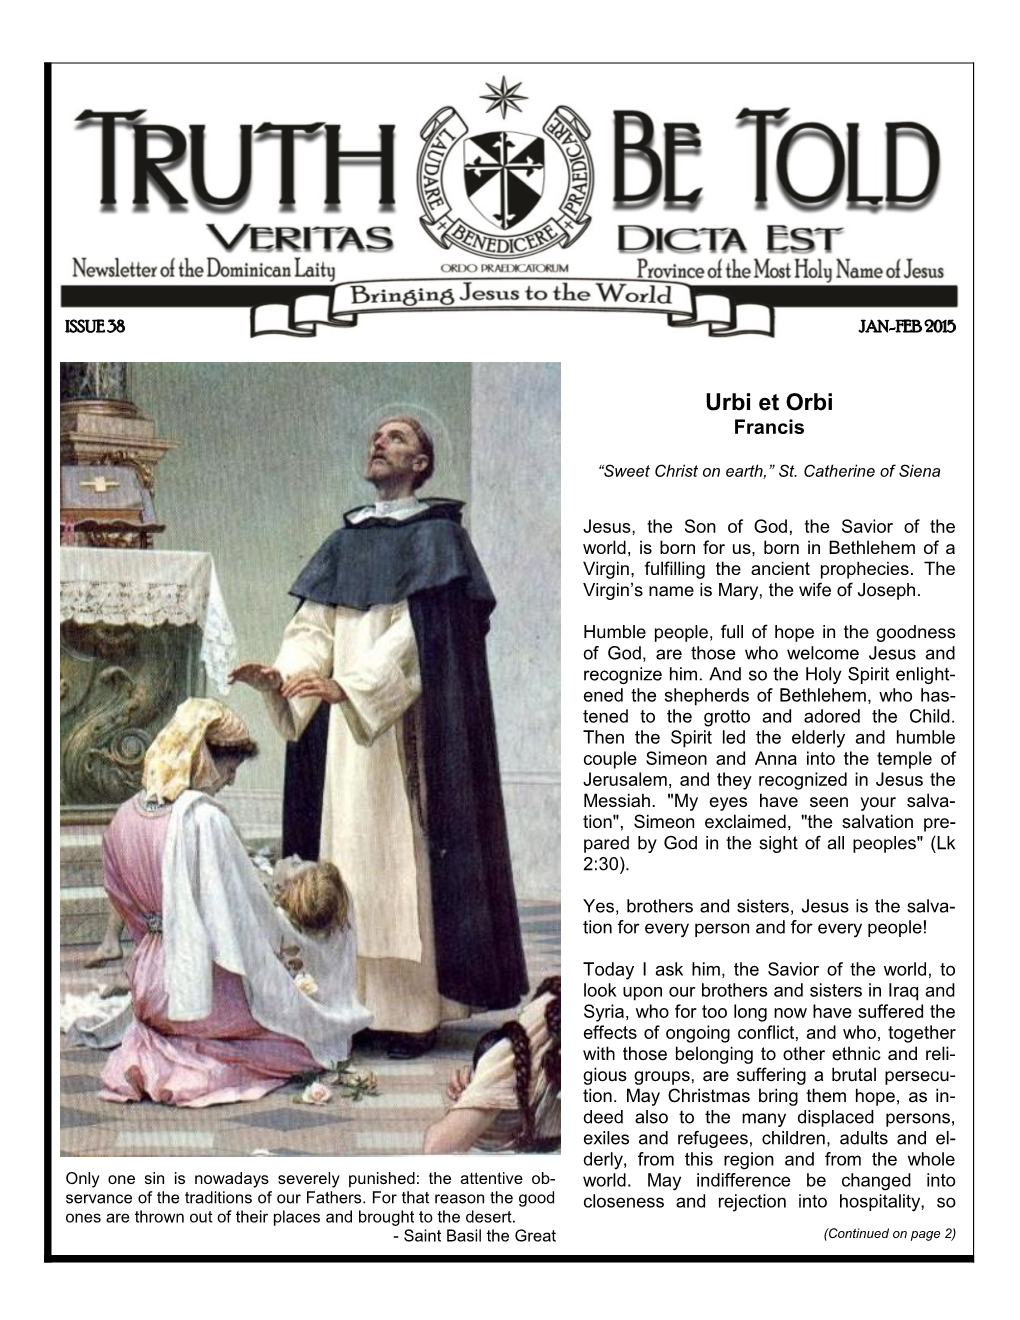 Truth Be Told 38 Page 2 Jan-Feb 2015